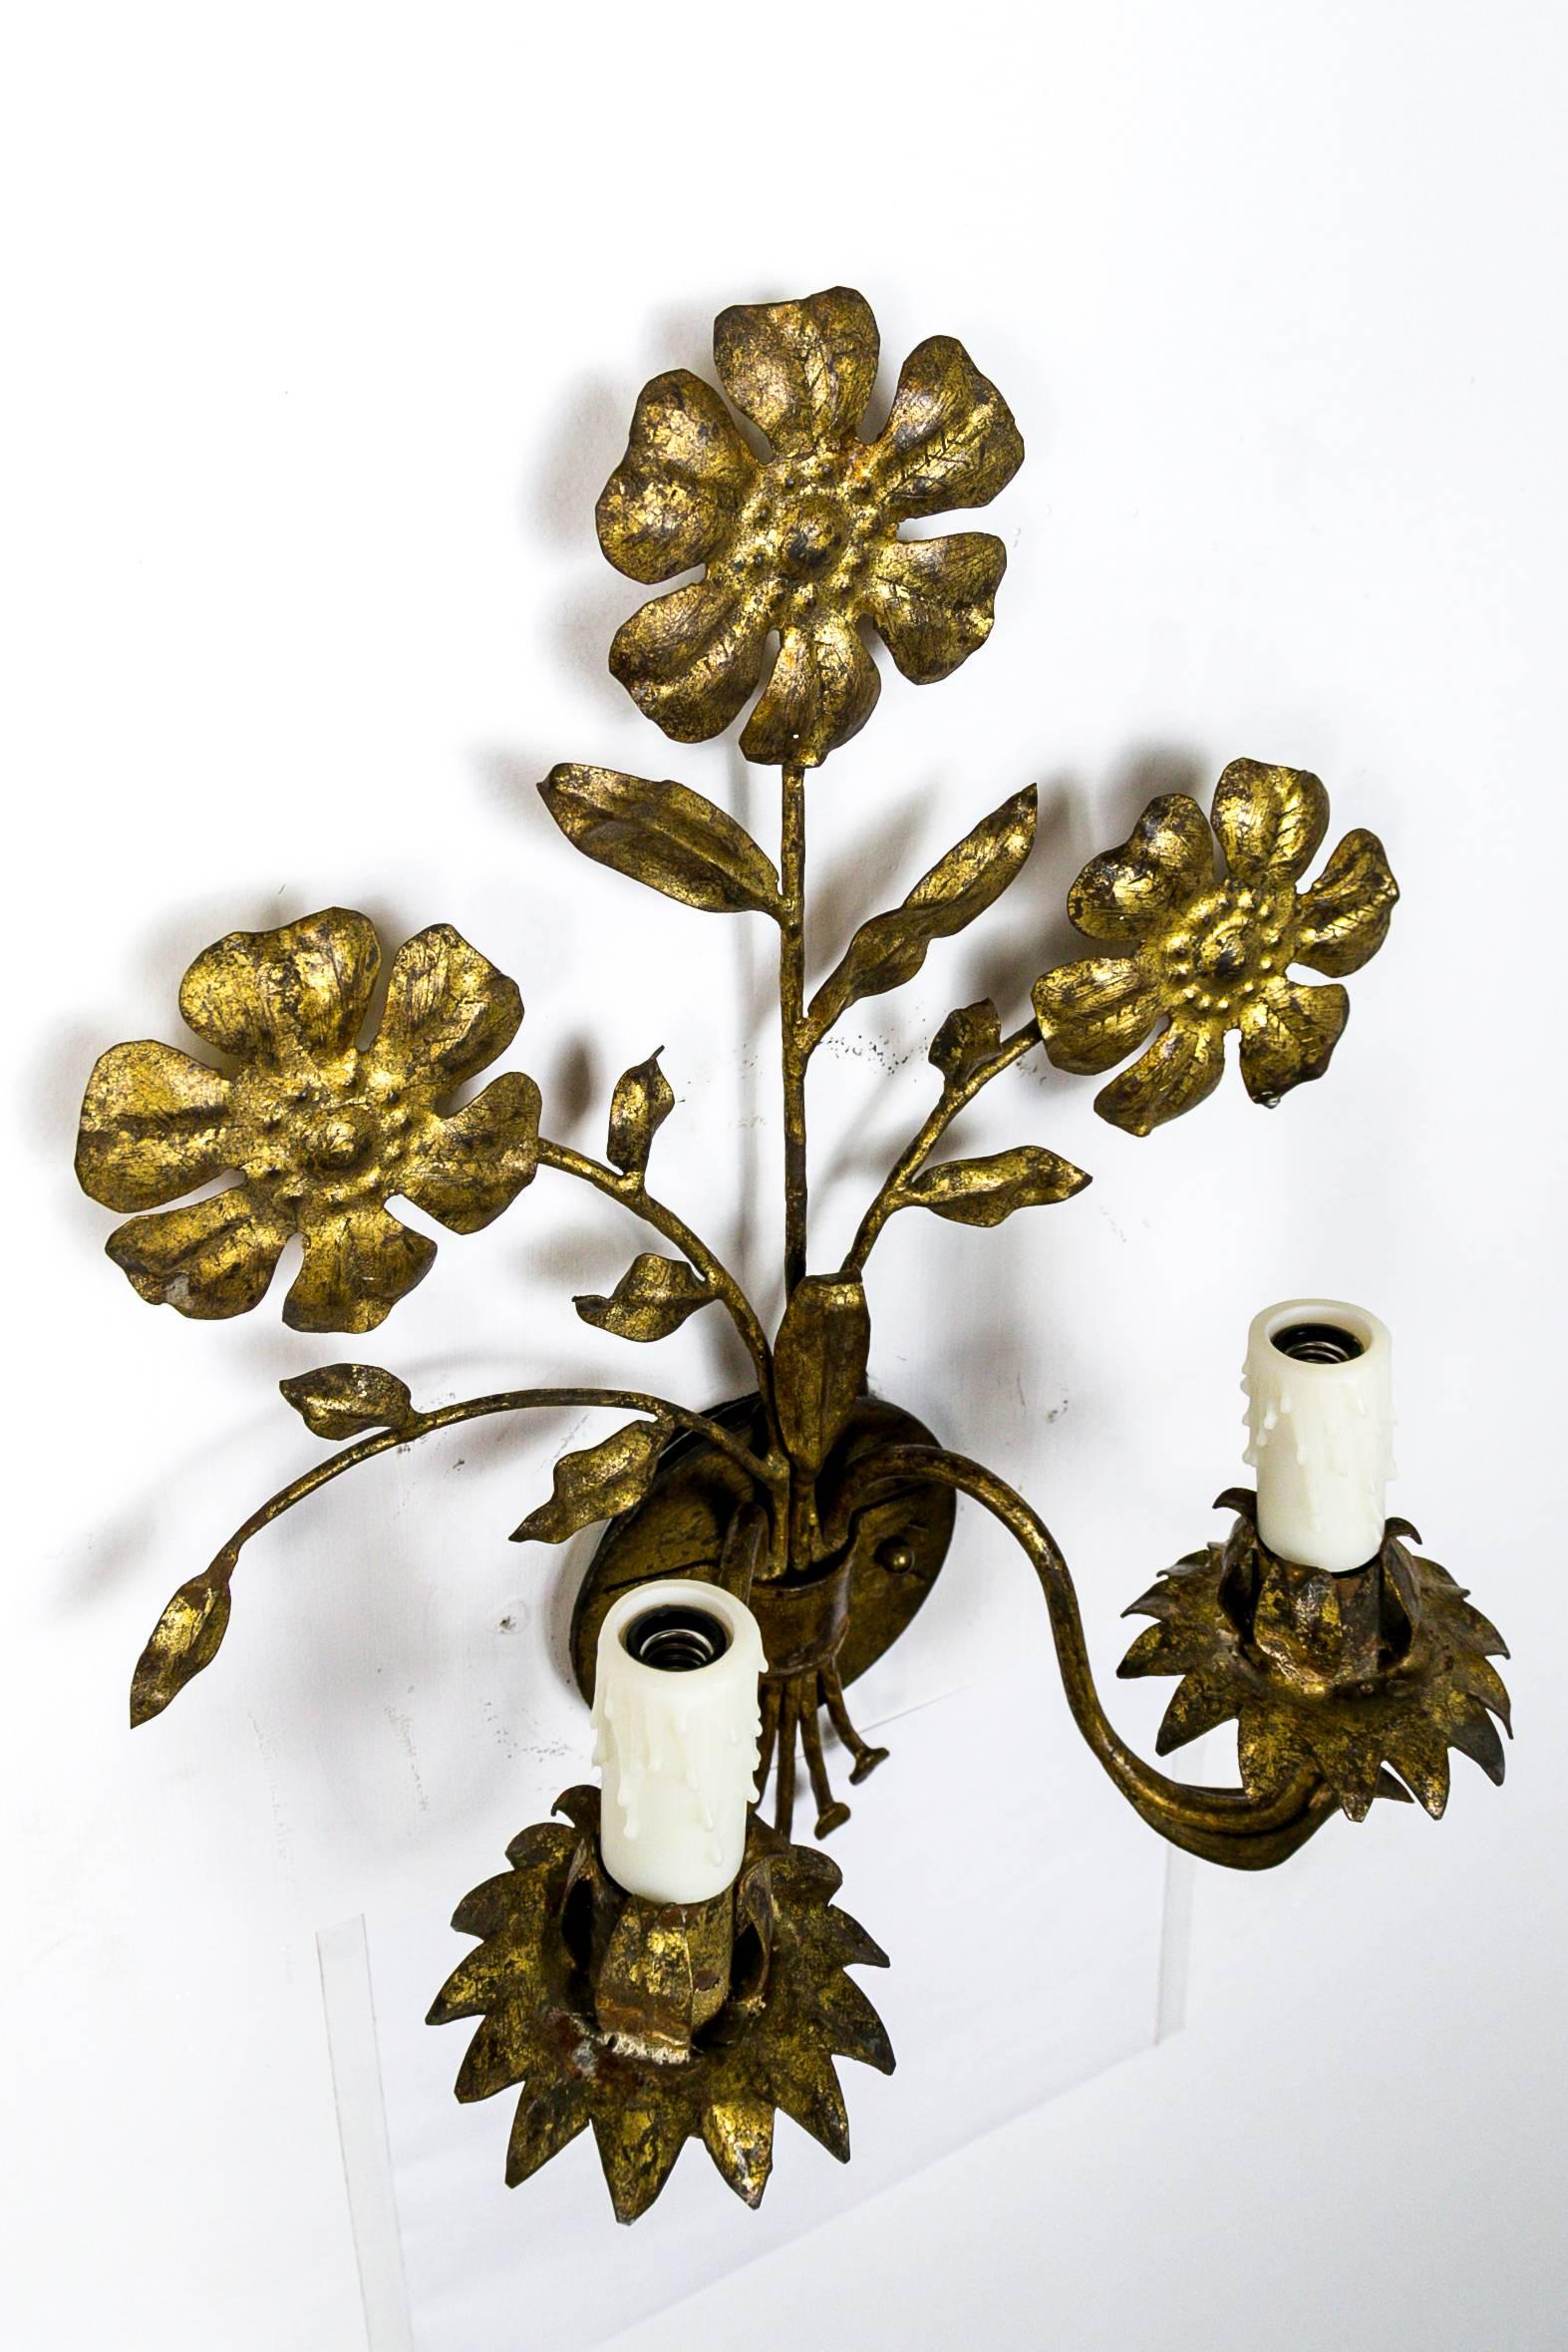 These beautifully shaped, double candelabra light fixtures of gilded metal sprouting three flowers with leaf accents and decorative stems. Made in Italy in the 1930s. Newly rewired with poly-beeswax candle covers. Measures: 12.5